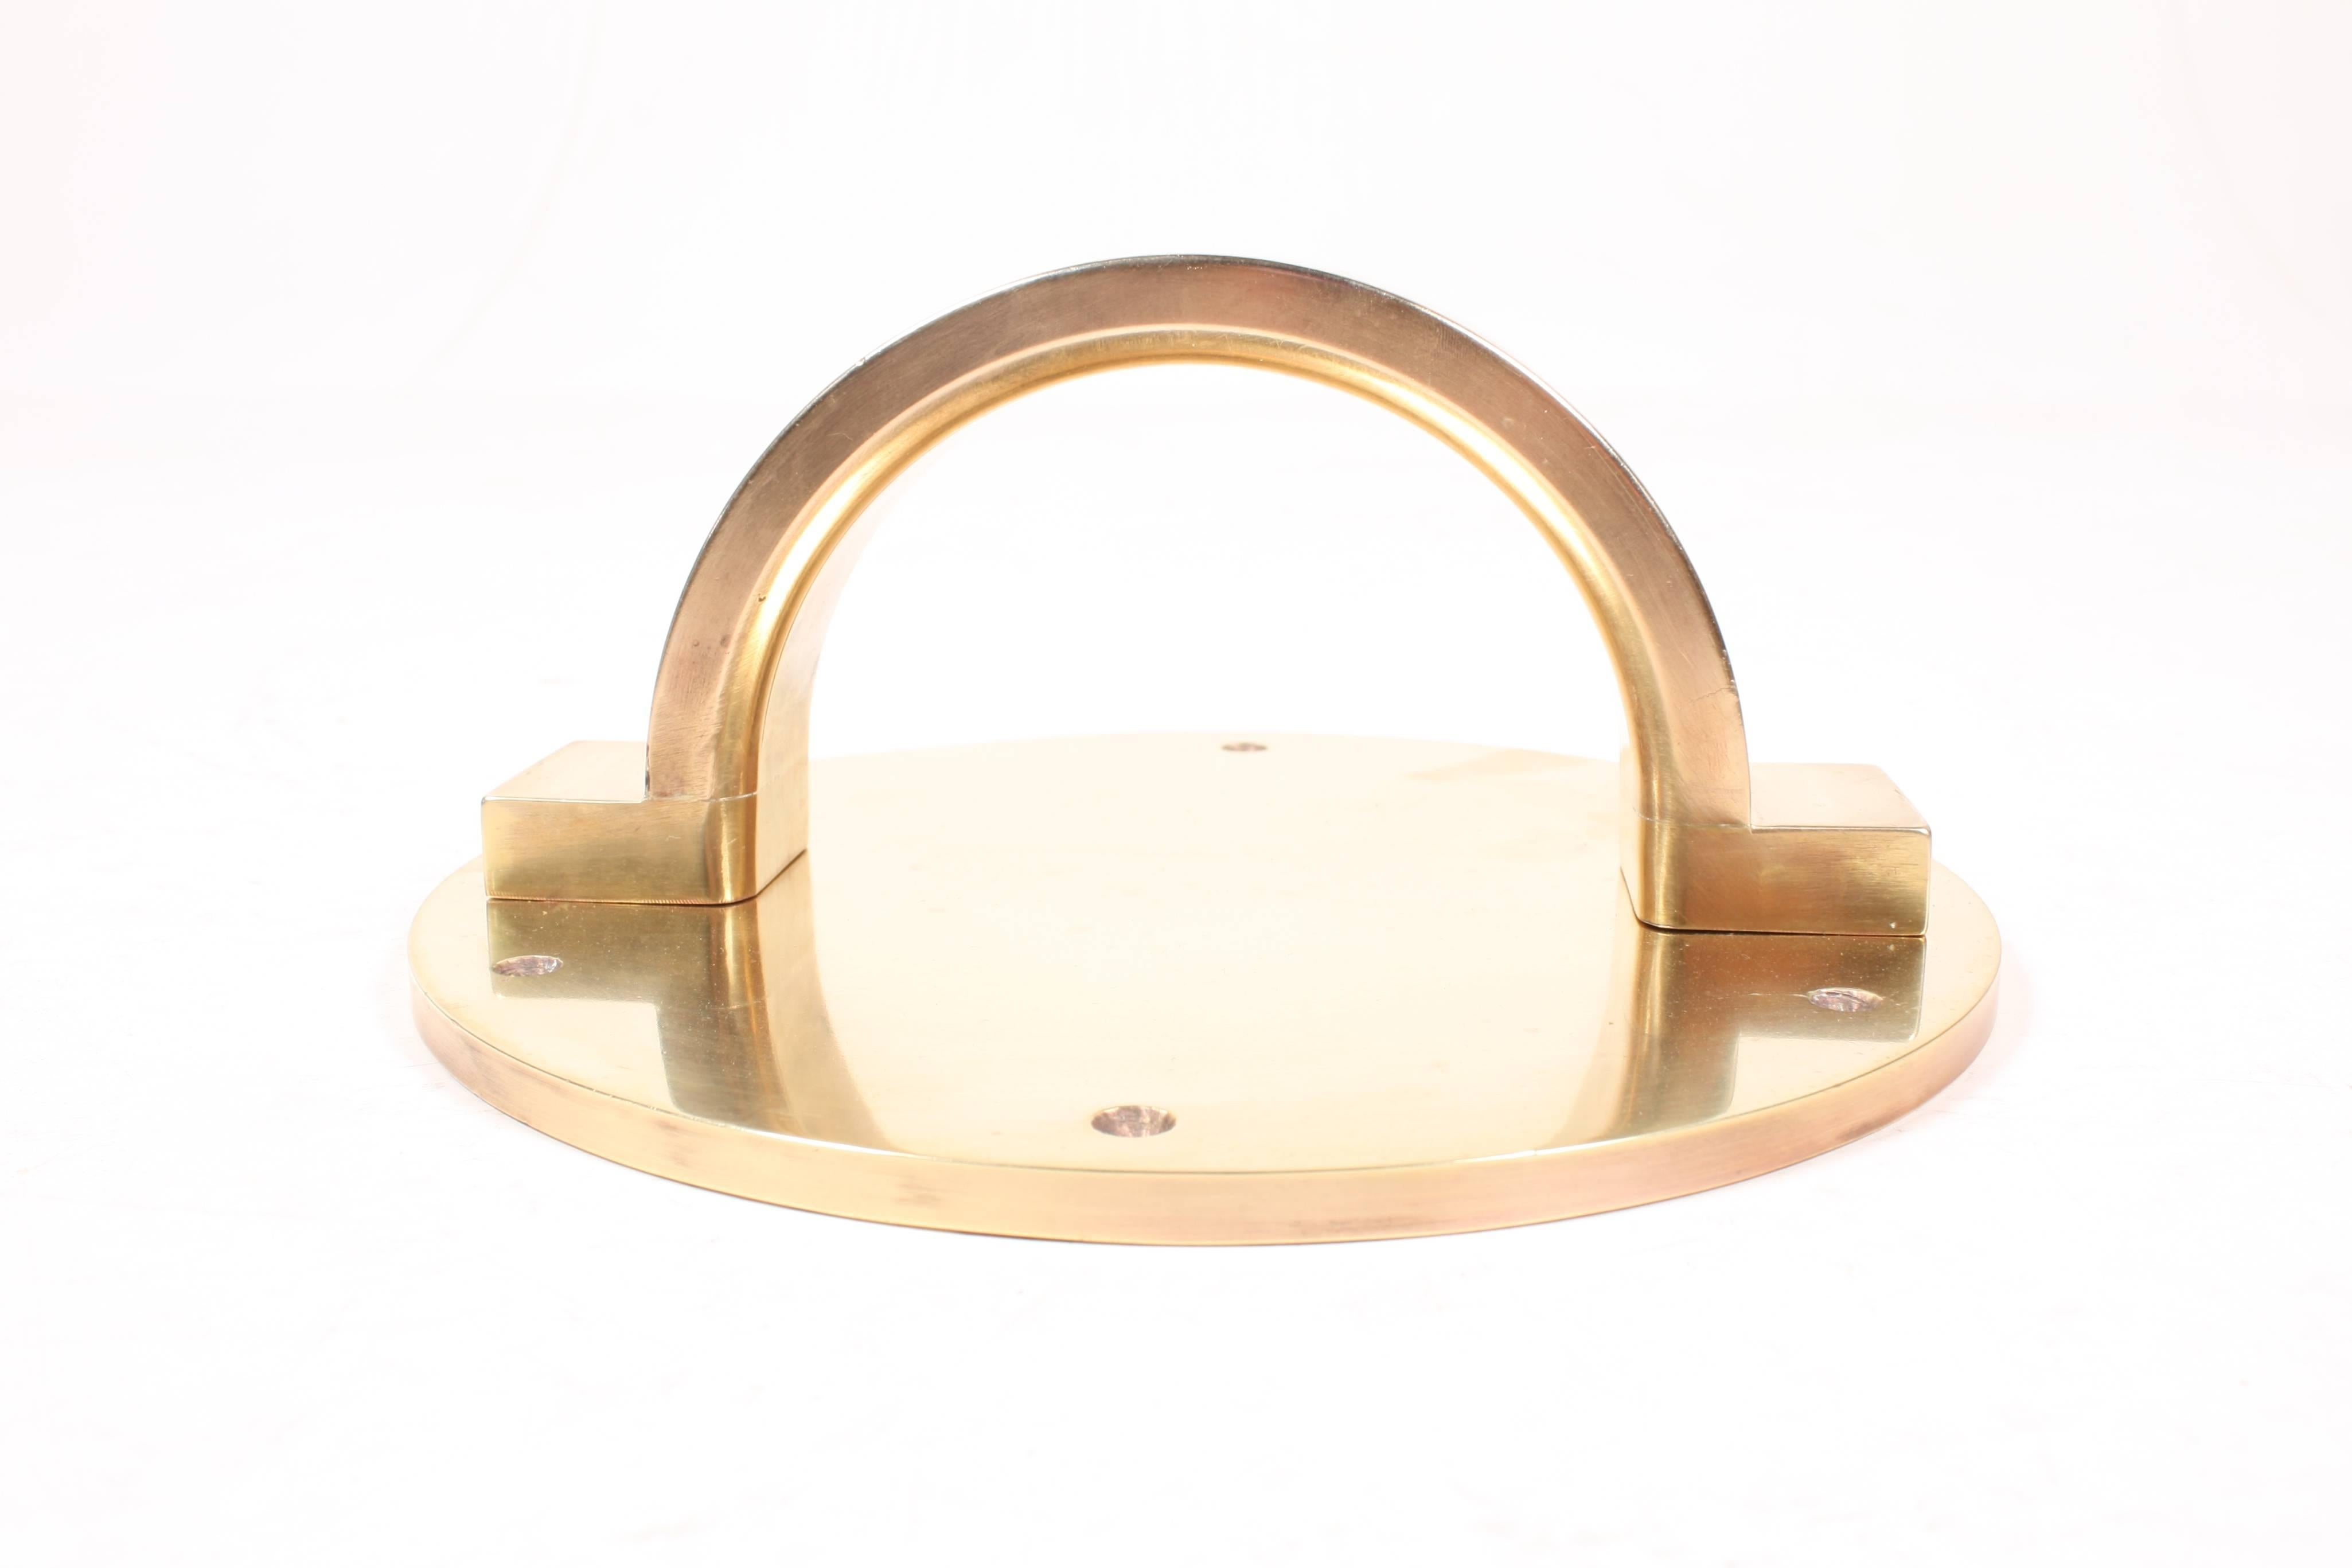 Art Deco front door pull in solid brass, made in Denmark in the 1930s
14 pieces available.